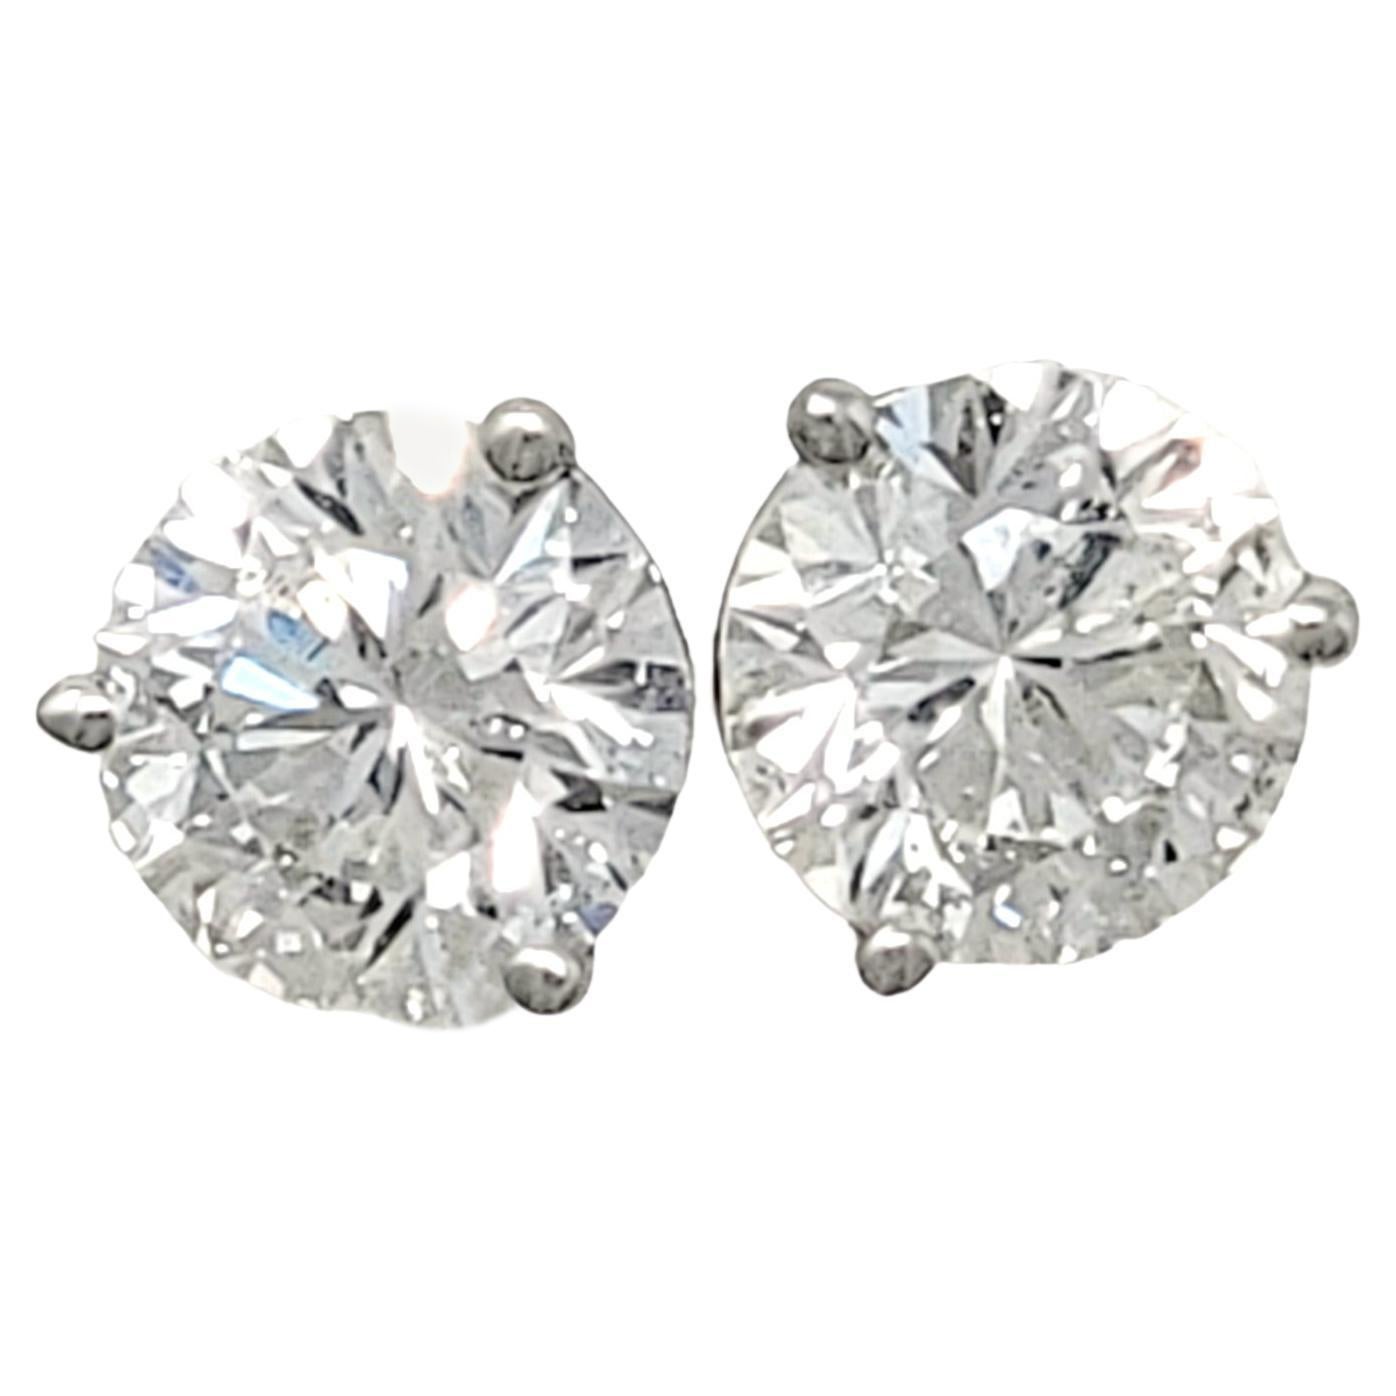 .94 Carats Total Round Leo Diamond Stud Earrings in White Gold 3 Prong Setting For Sale